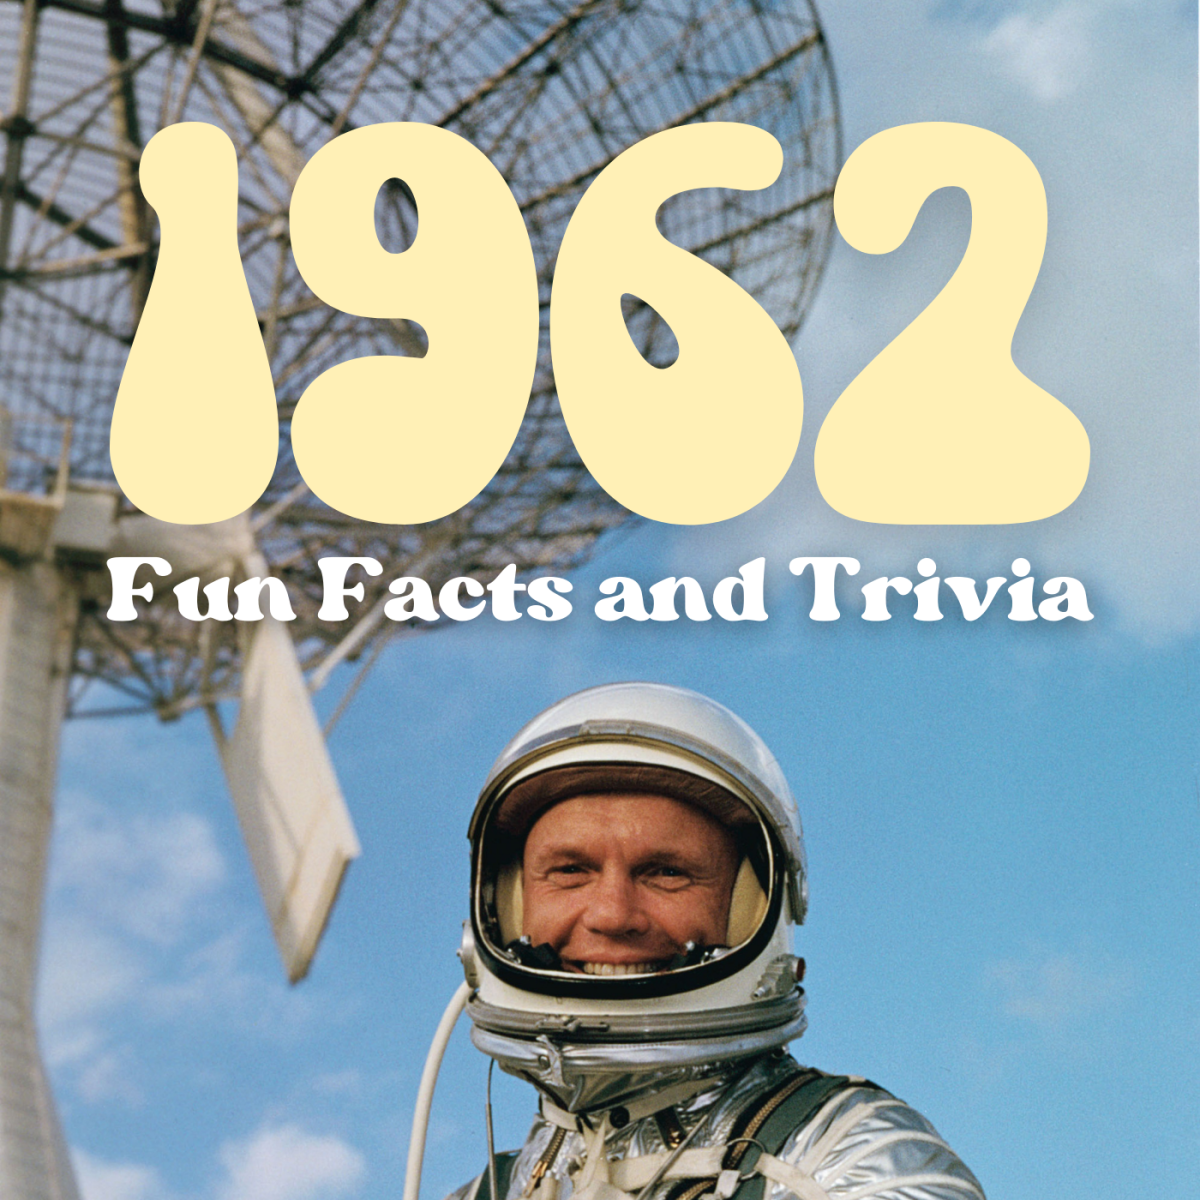 Astronaut John Glenn became the first American to orbit the Earth in '62. What else do you know about this year? This article teaches you fun facts, trivia, and historical events from the year 1962.